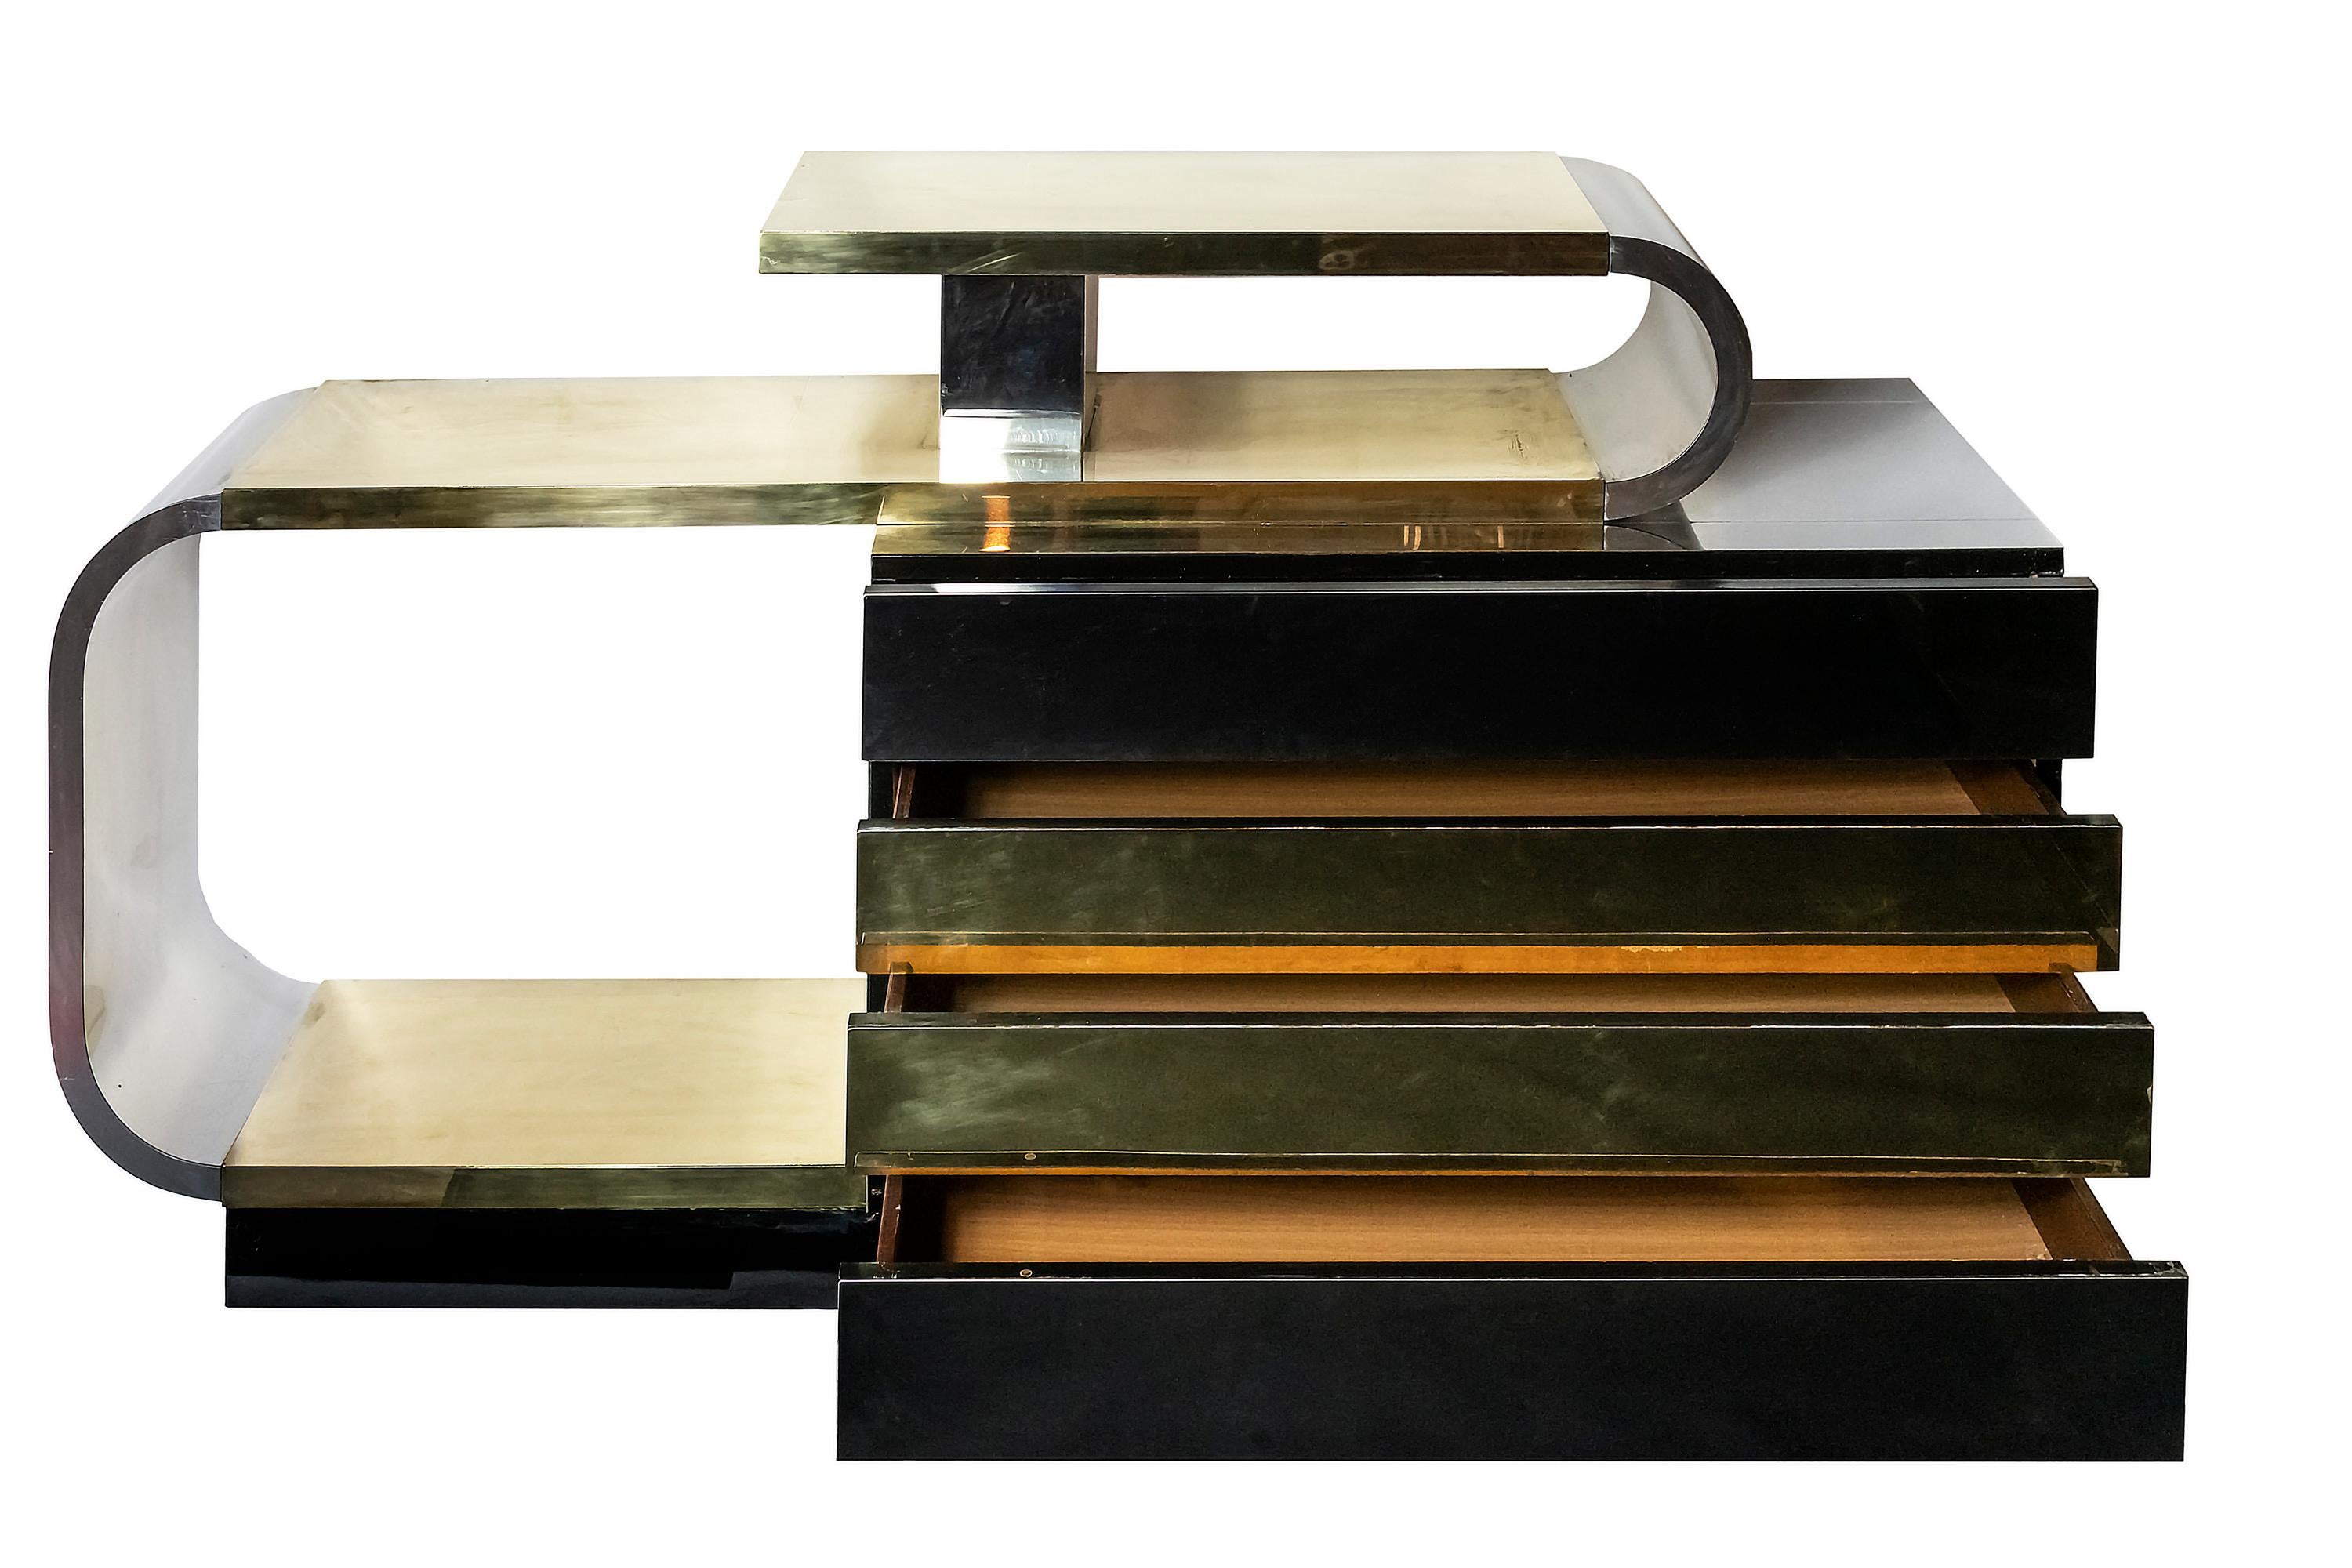 Italian Mid-Century Asymmetric Brass And Chrome Sideboard in Paul Evans Style